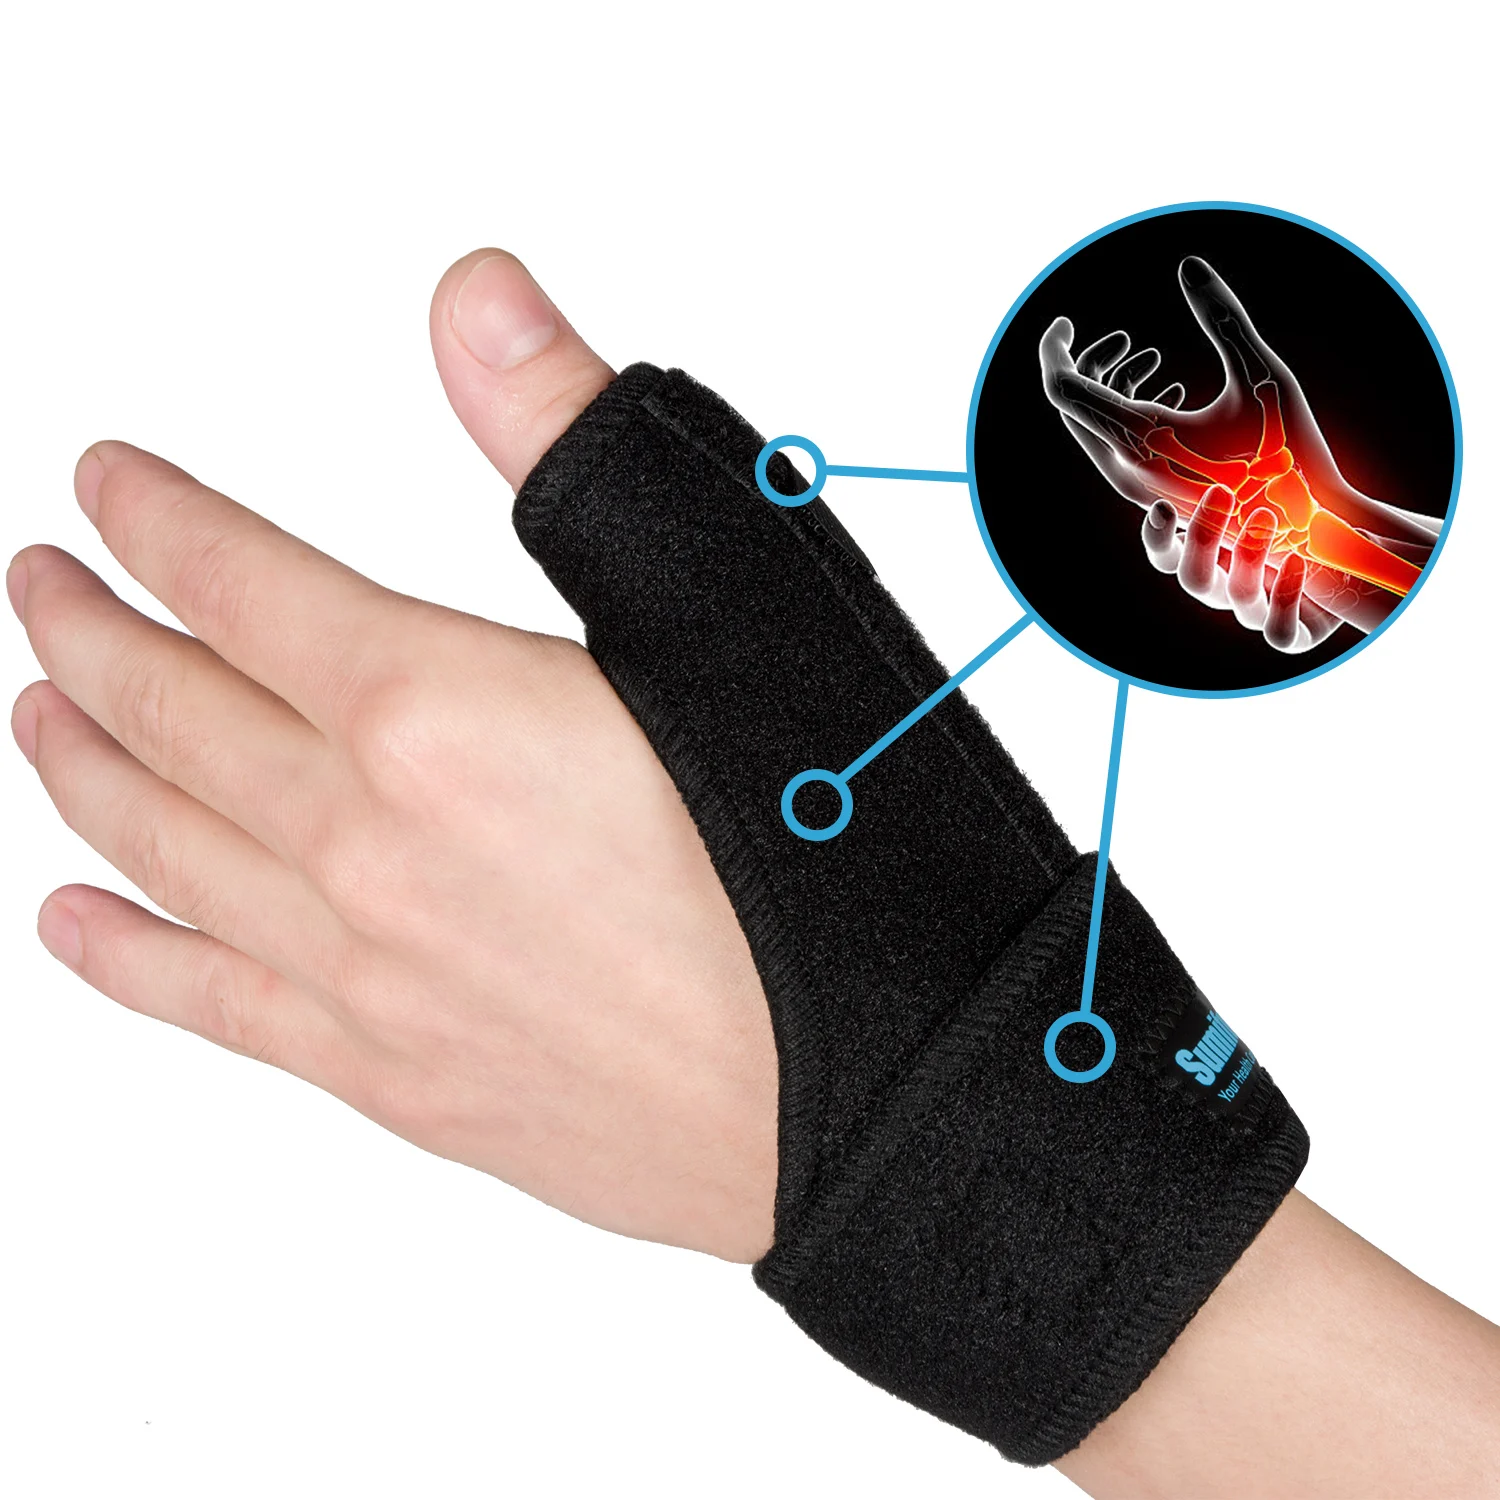 1pcs Hand Protecor Thumb Spica Wrist Brace Splint Support for Arthritis Tendonitis Carpal Tunnel Pain Relief C1572 wrist support hand bandage wrist splint for hand support tendonitis arthritis pain relief